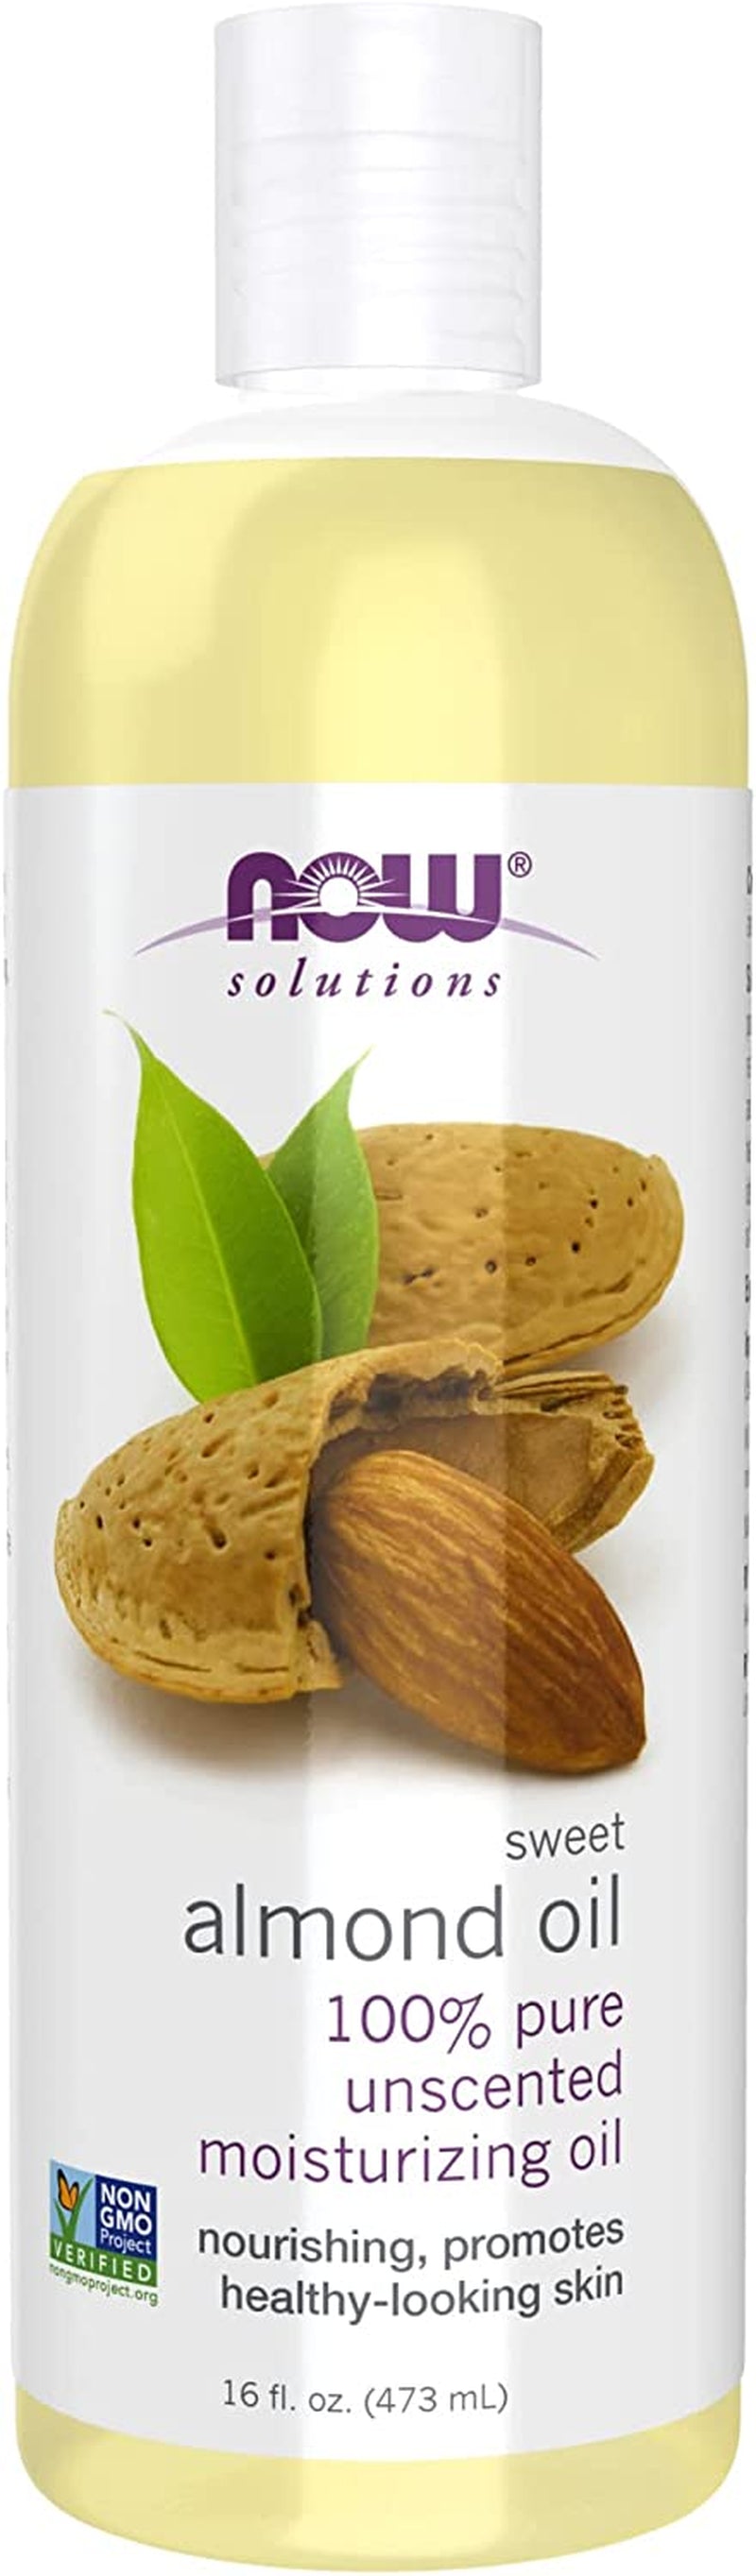 Solutions, Sweet Almond Oil, 100% Pure Moisturizing Oil, Promotes Healthy-Looking Skin, Unscented Oil, 16-Ounce,Package May Vary